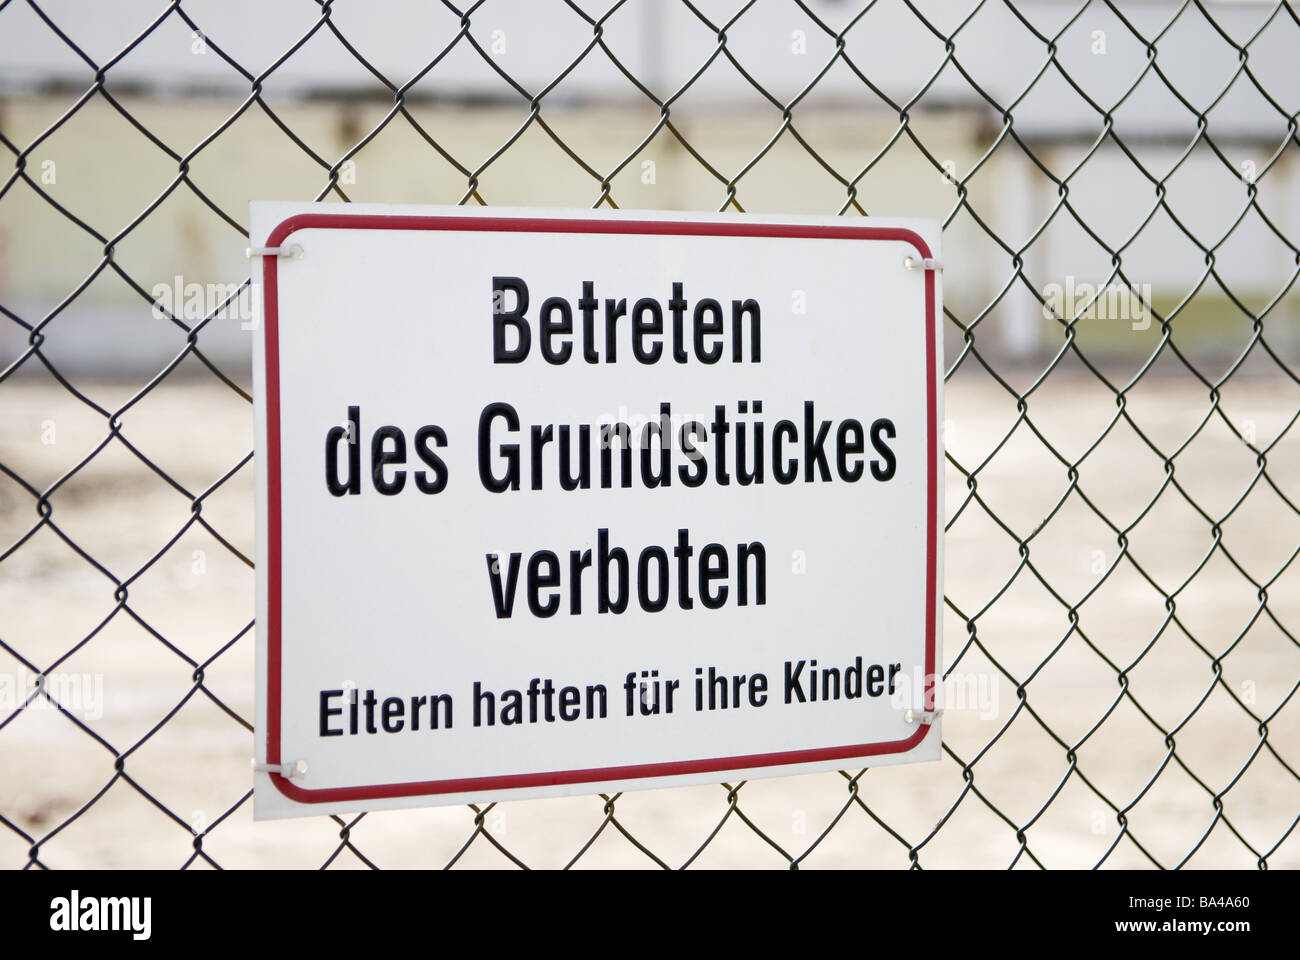 Stitch-wire-fence building site-sign prohibition-sign buildings 03/2006 outside sites building site building site-sign fence Stock Photo